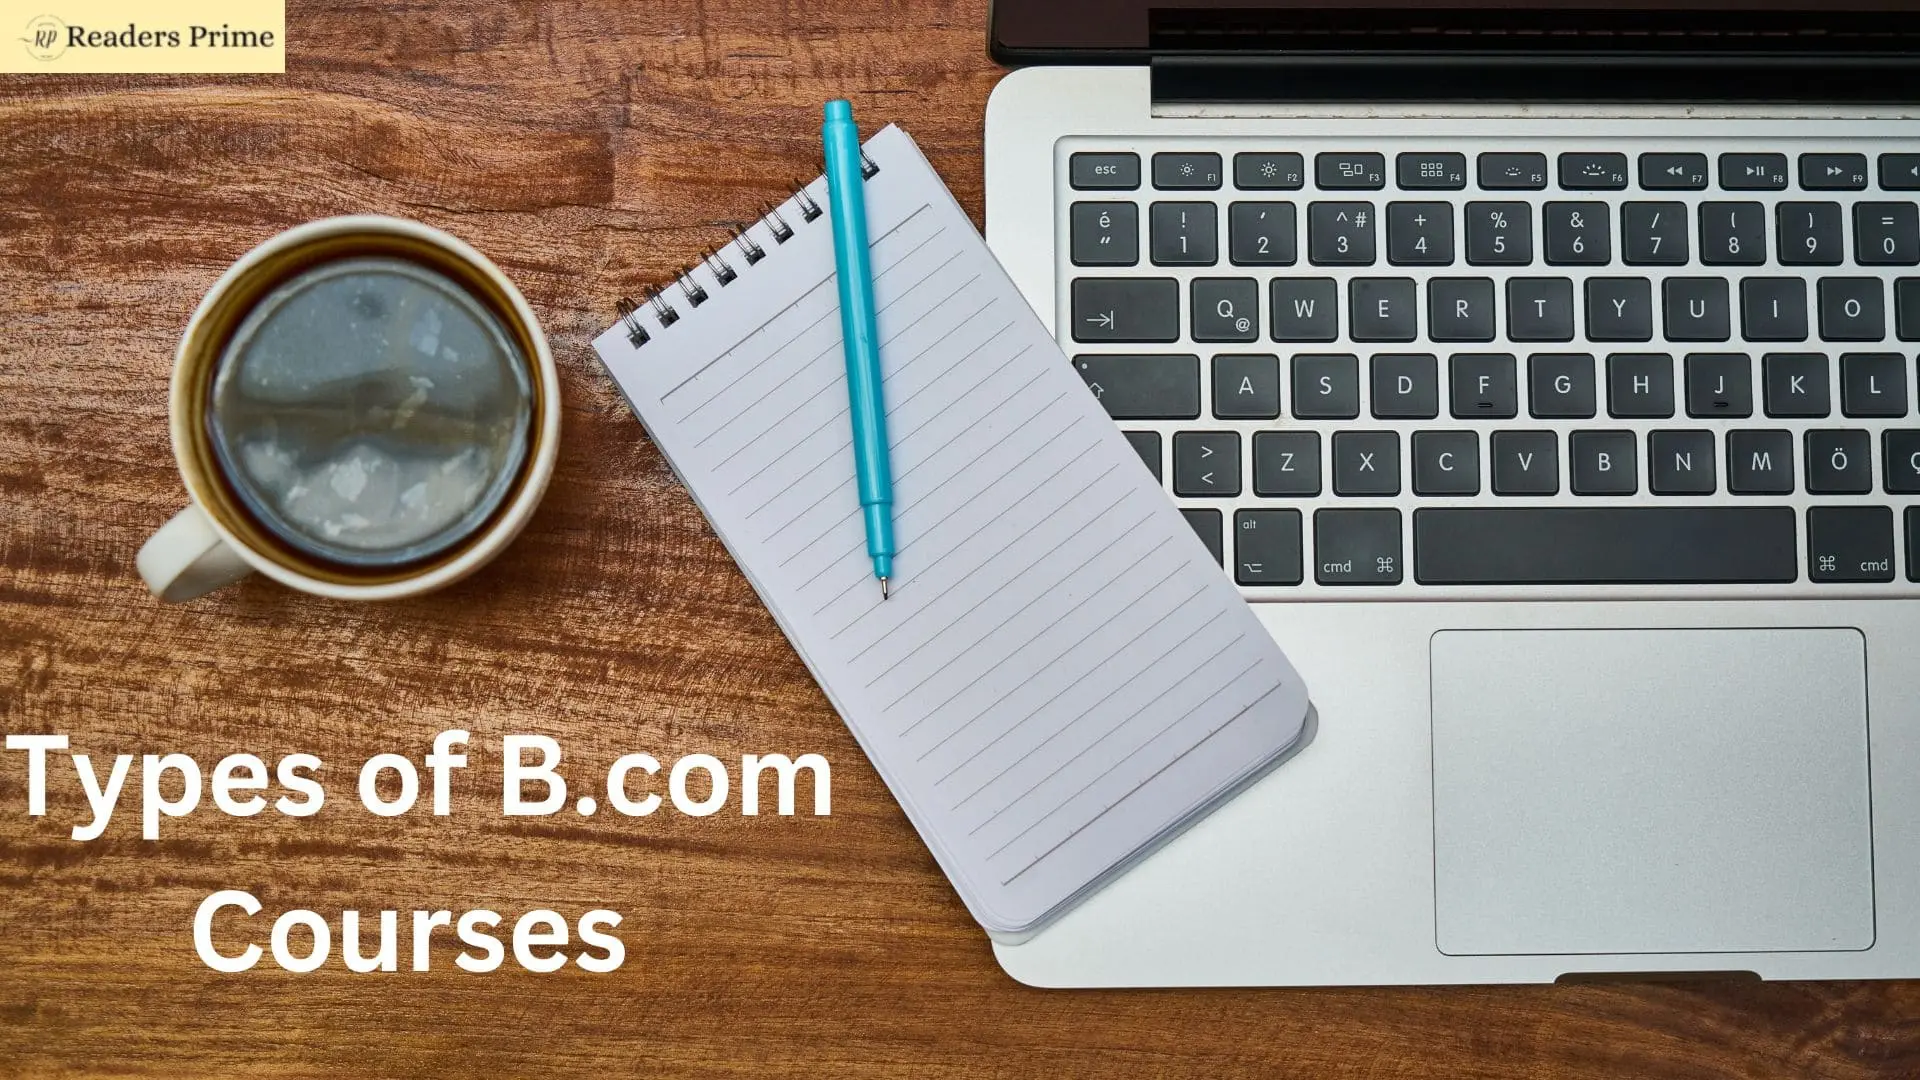 How many Types of B.com Courses are available